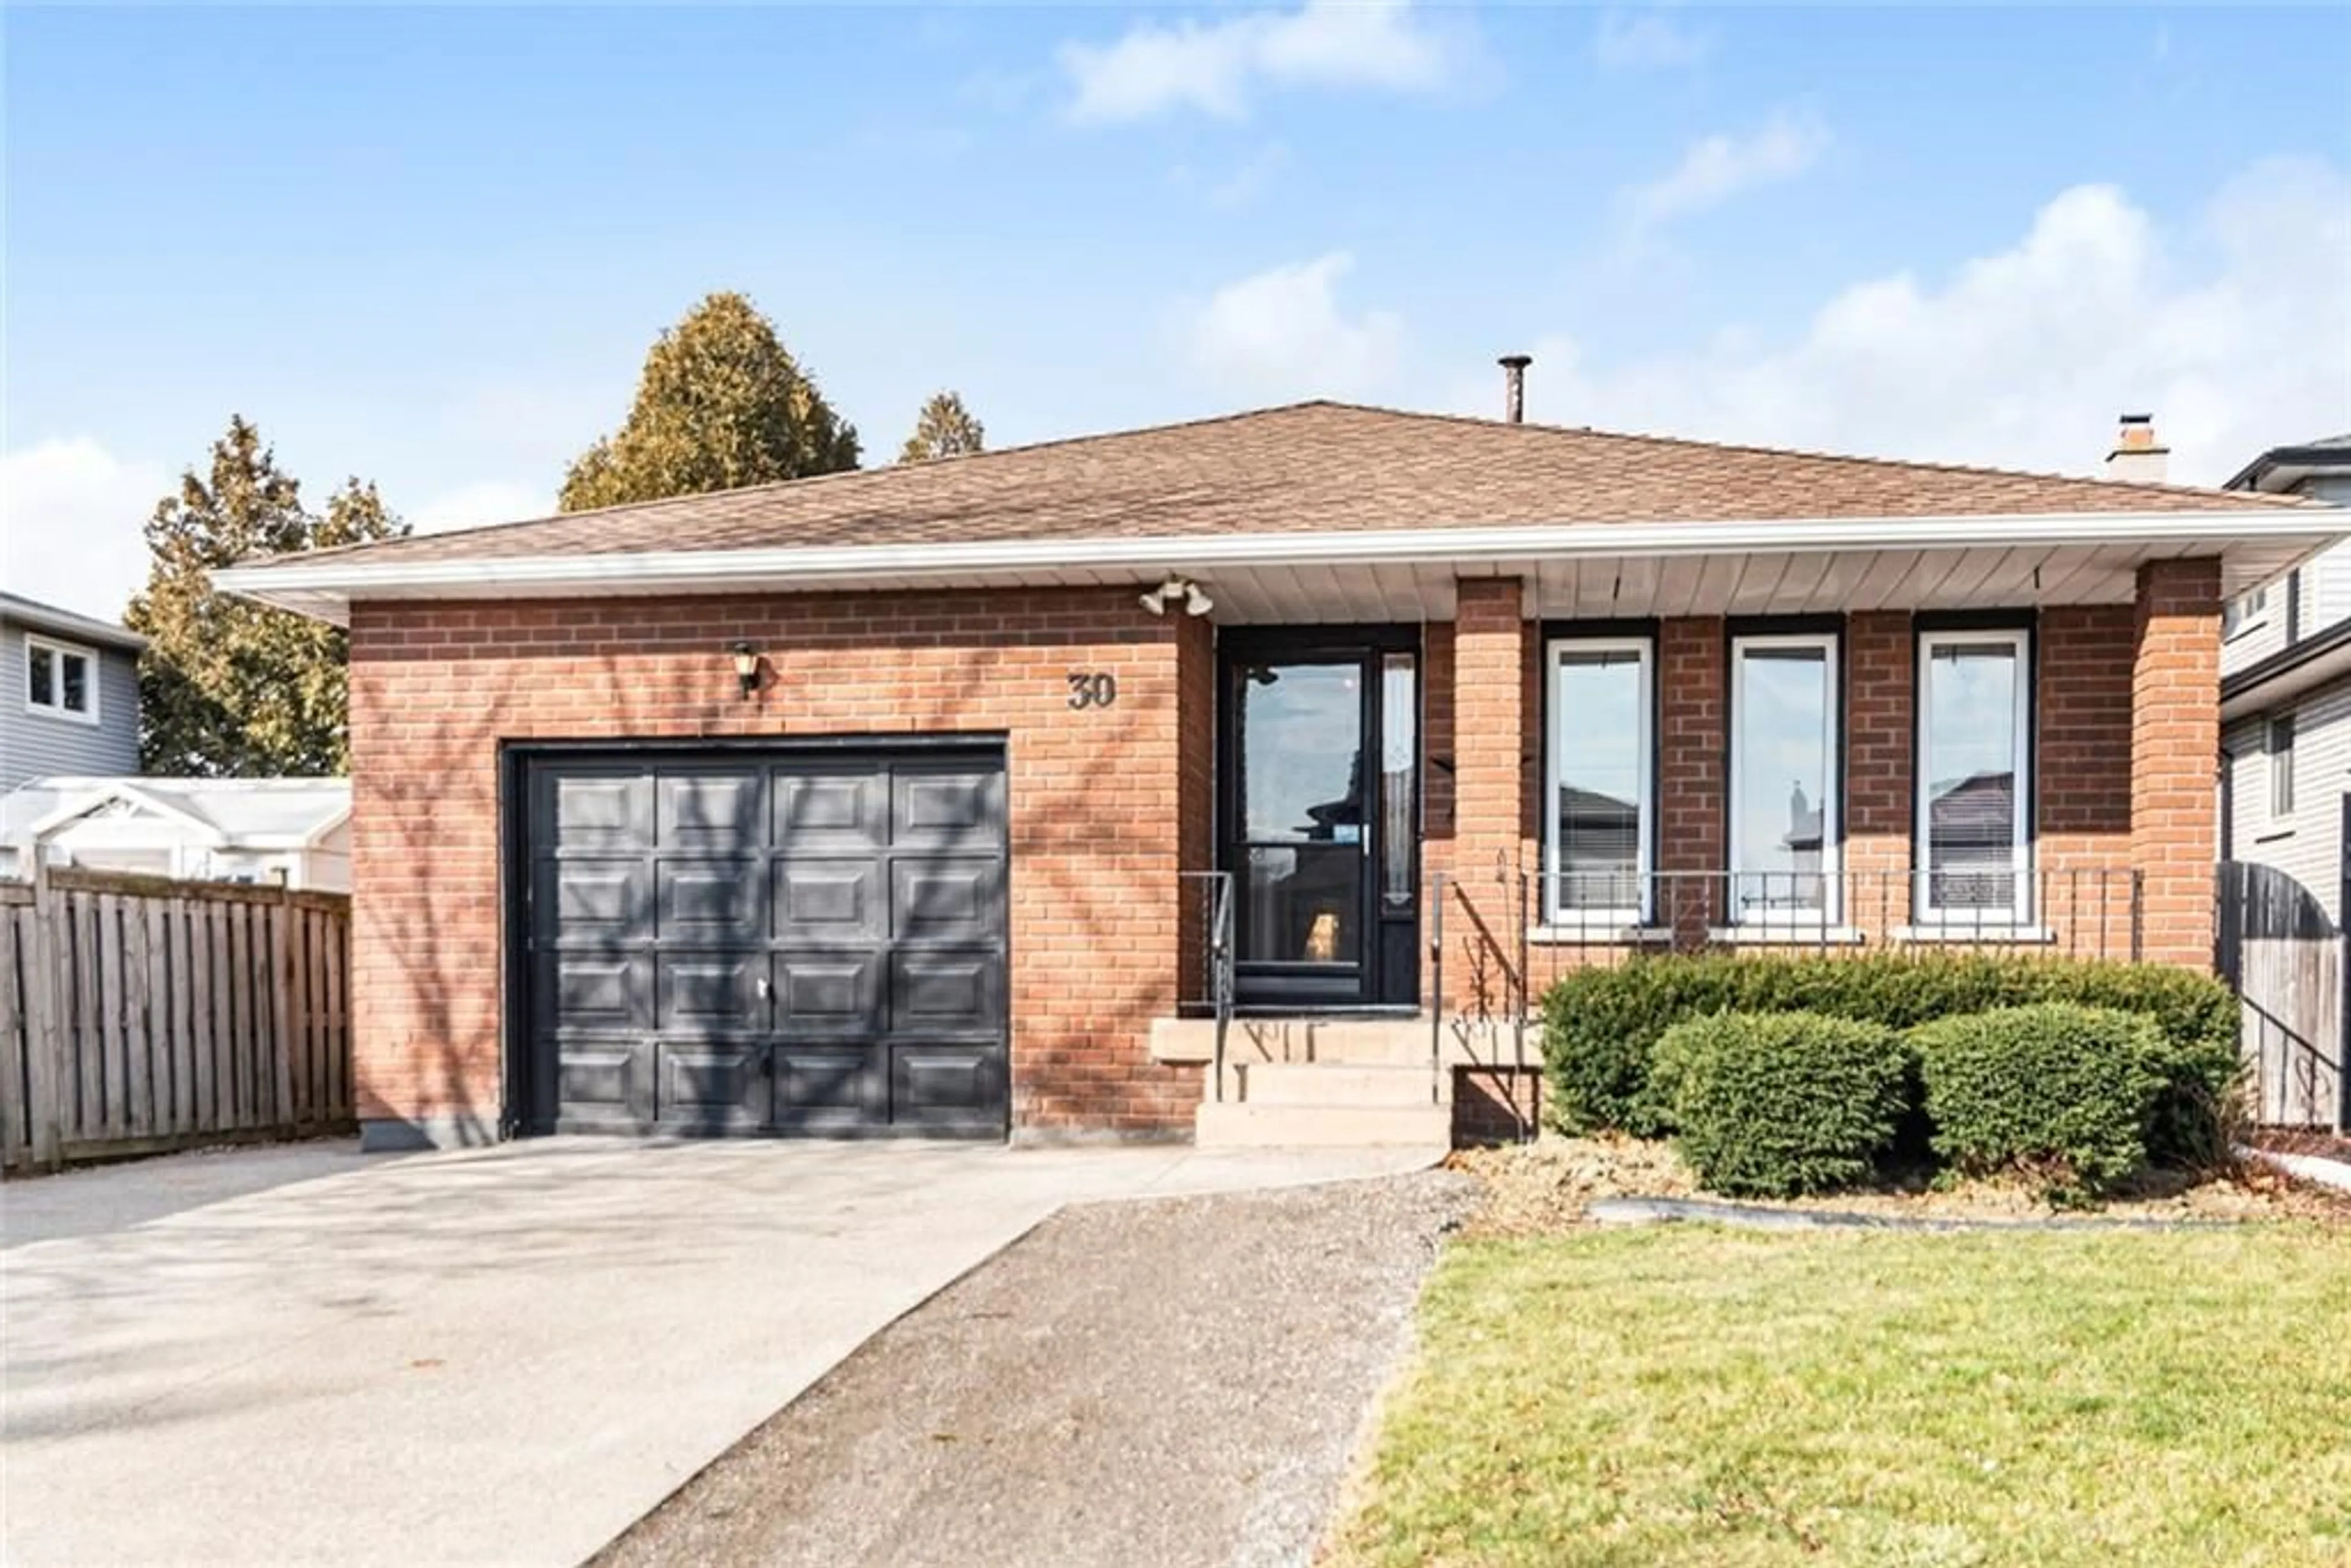 Home with brick exterior material for 30 Osgoode Crt, Hamilton Ontario L8W 3C5